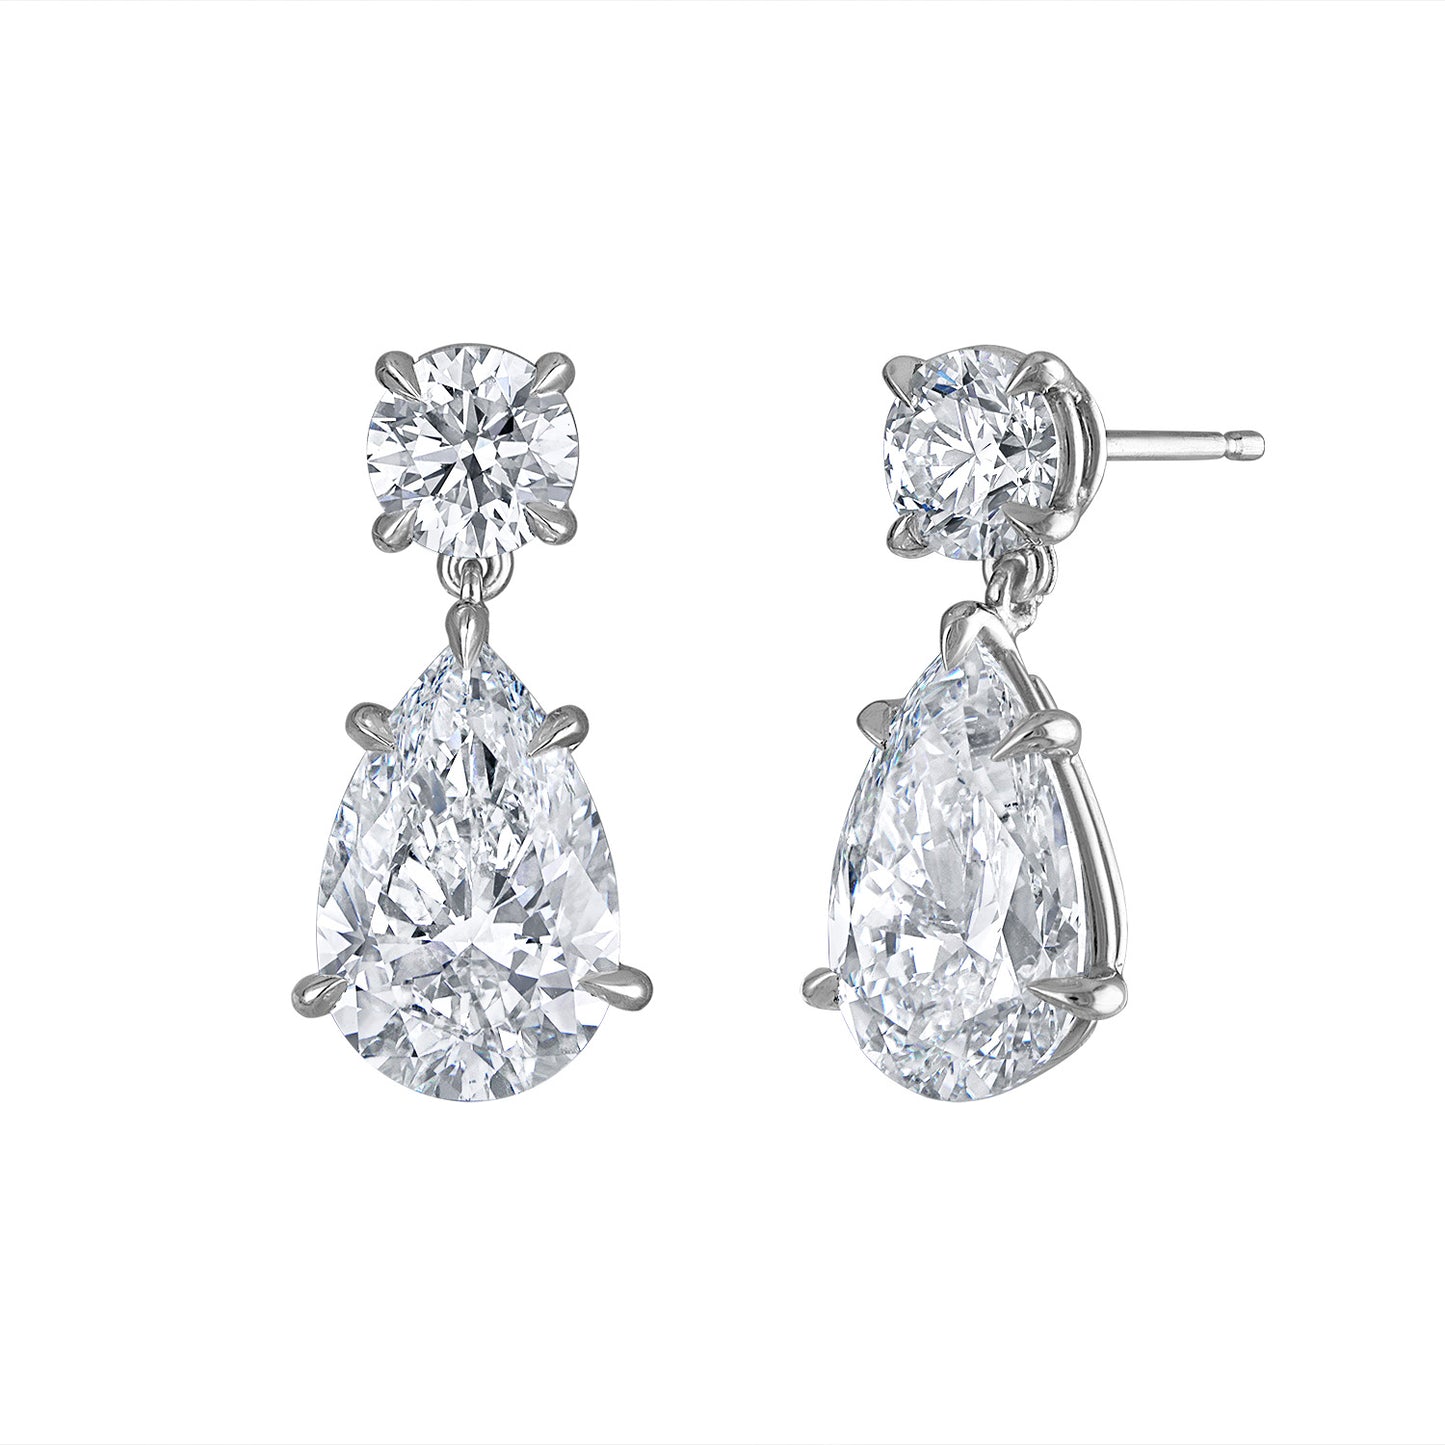 Round Brilliant and Pear Shape Diamond Drop Earrings in Platinum